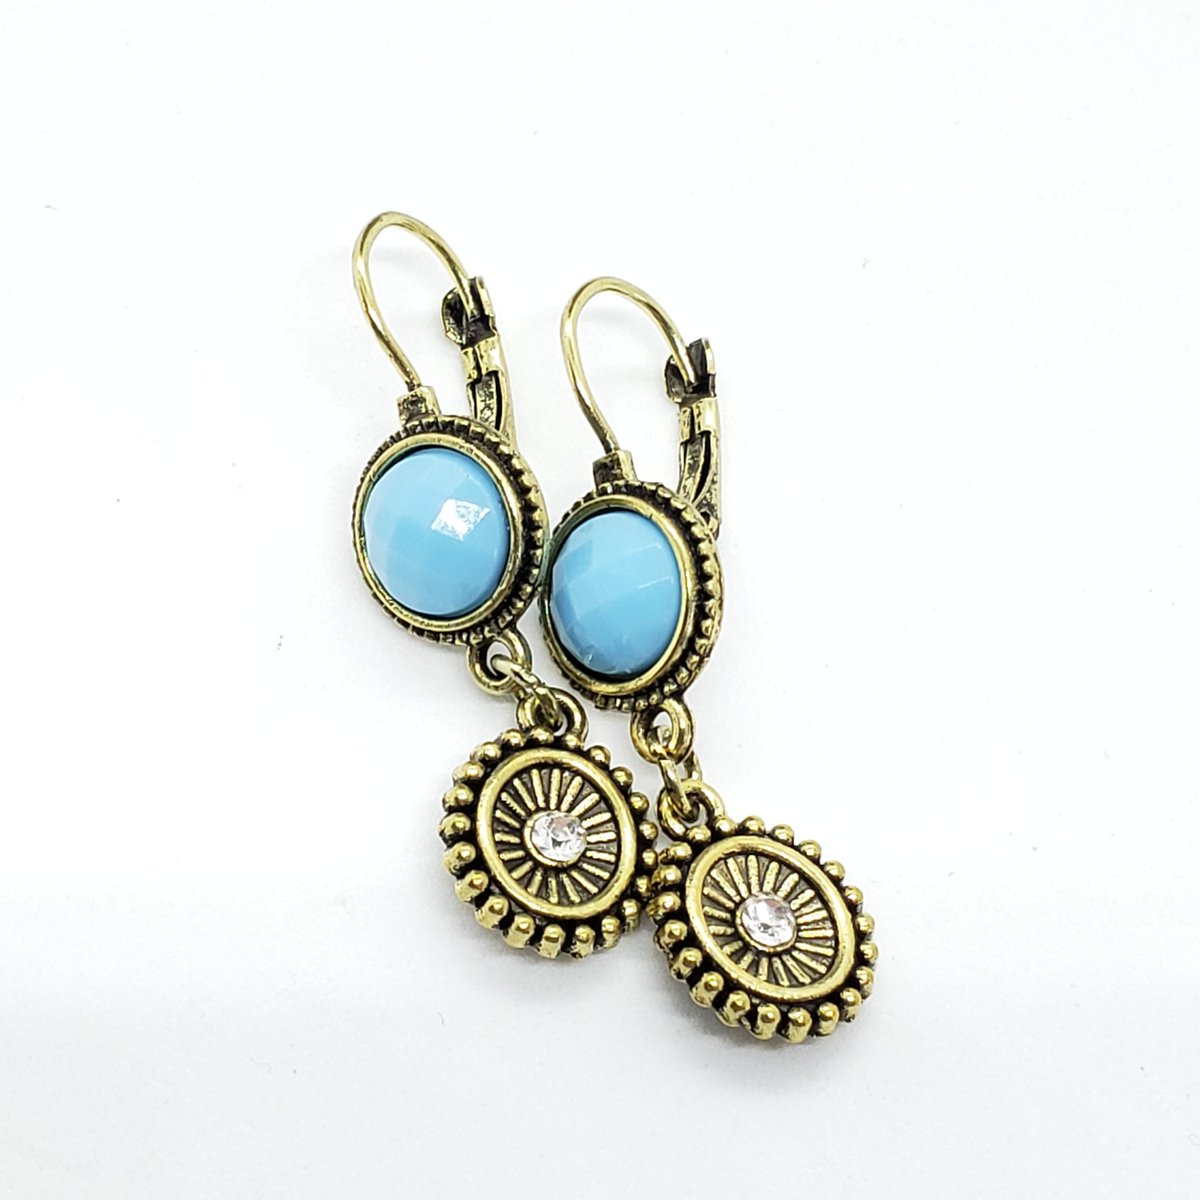 Awesome! Amazing! Our latest arrival. Earrings, Turquoise Blue Green & Bronze Layered Earrings, Gold Tone Findings, Rhinestone Dangle, Vintage-style, lever back earrings at $12.00. 
etsy.com/listing/147272…
#TurquoiseRhinestone #RhinestoneDangle